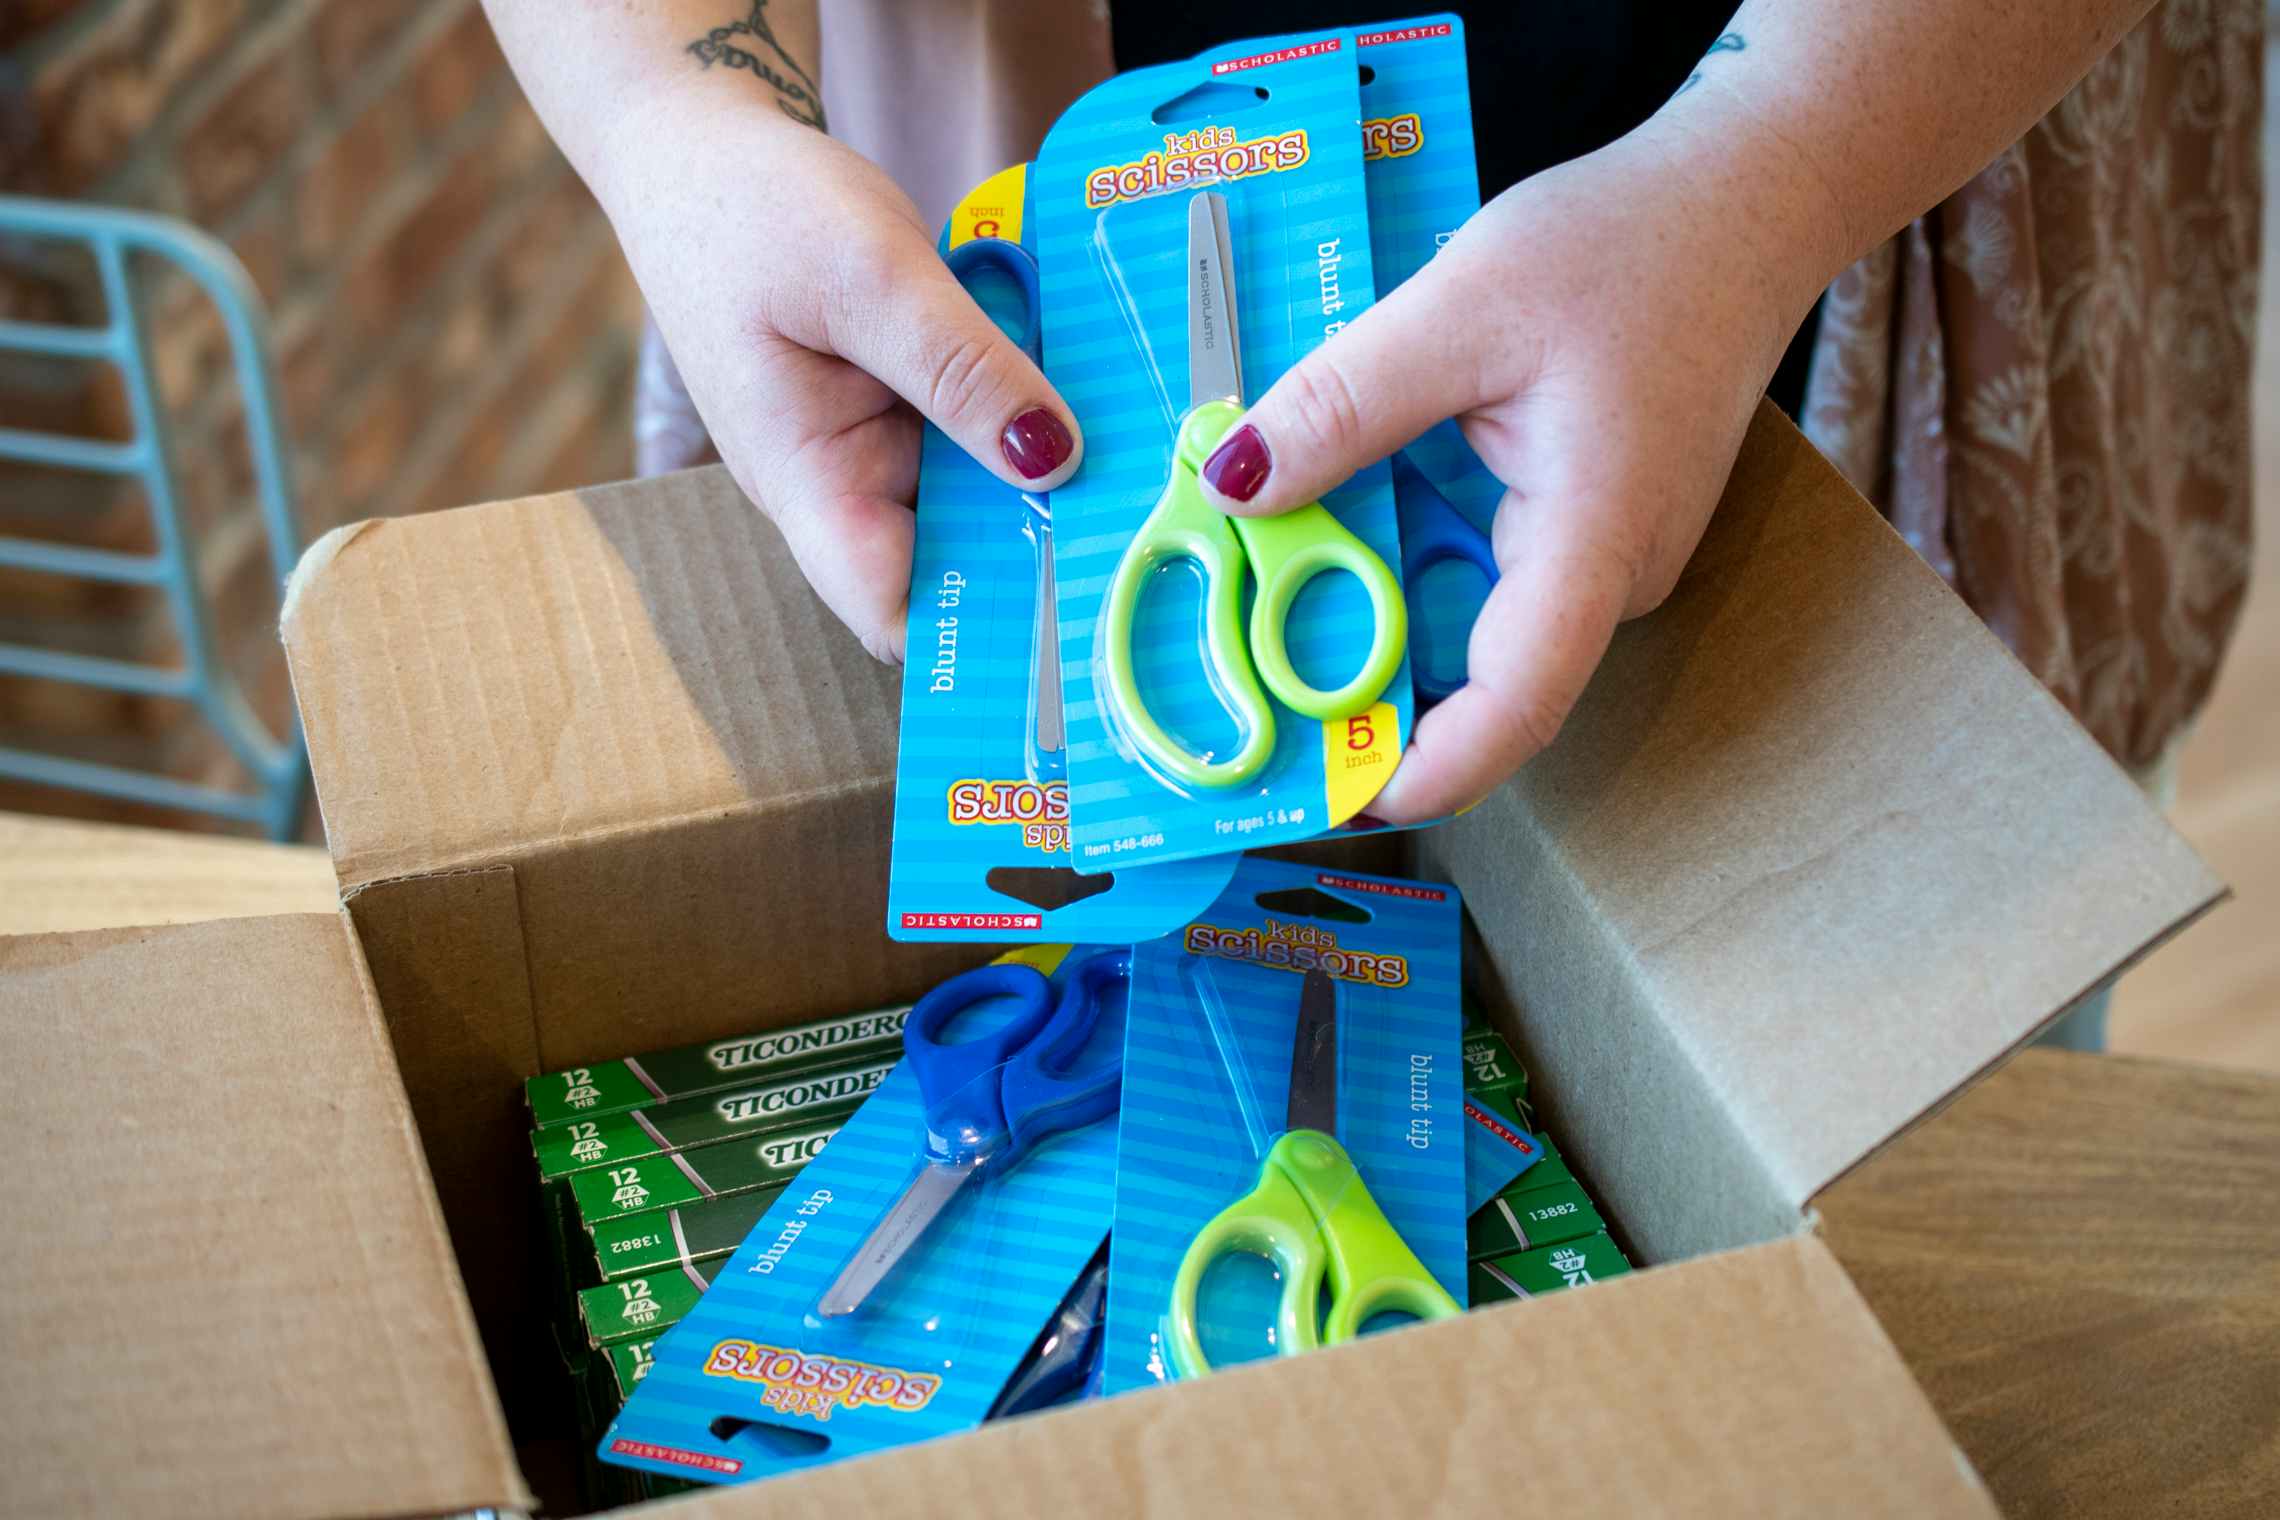 A person taking multiple pairs of scissors out of a shipping box with more scissors and boxes of pencils in it.